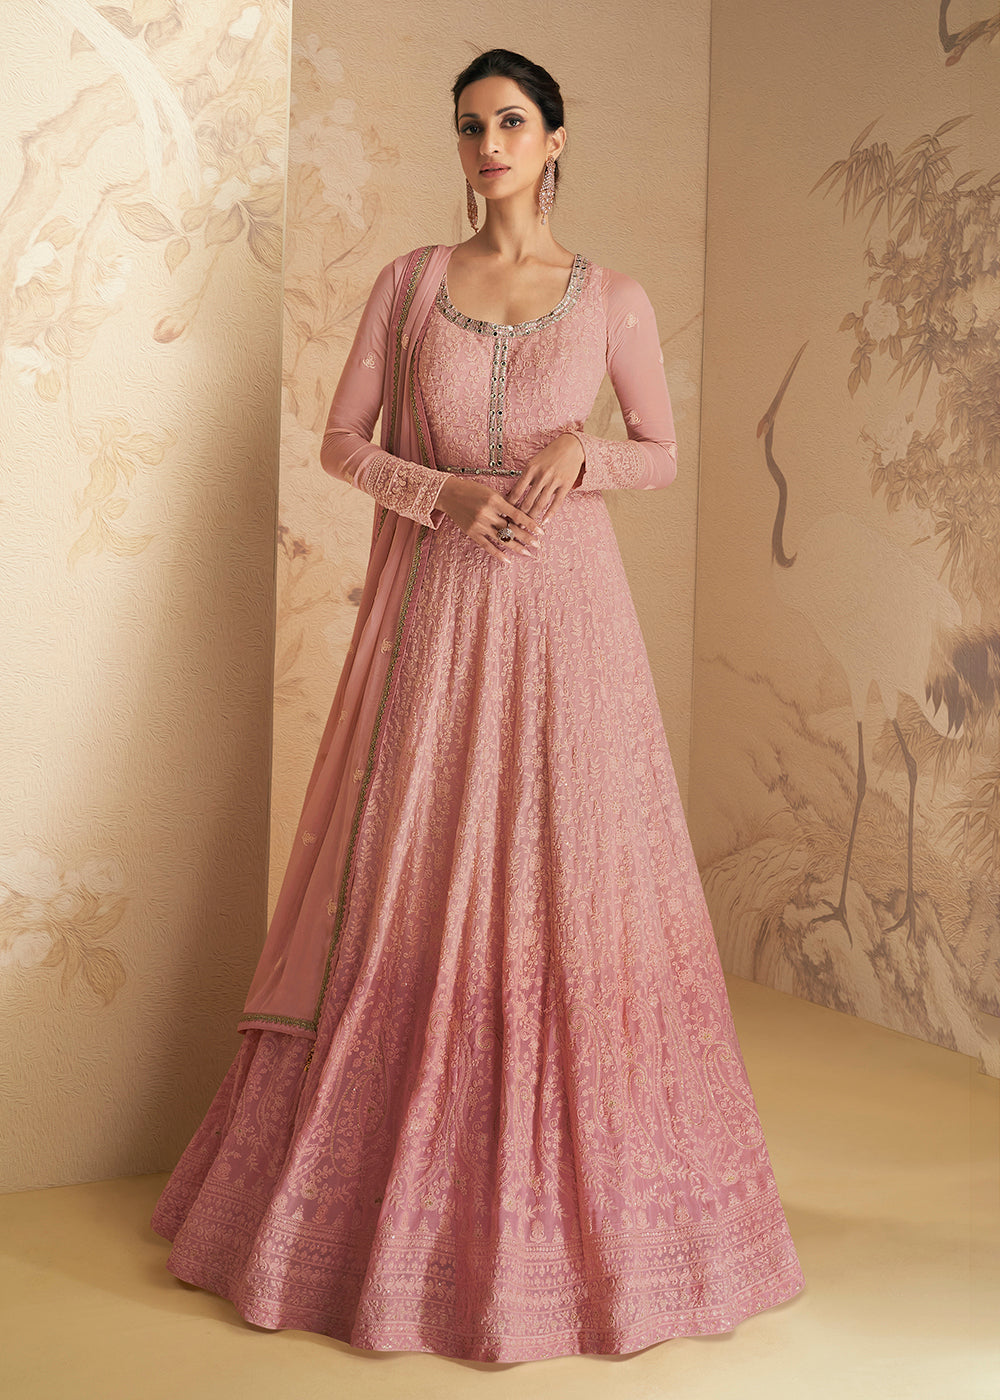 Buy Now Chikankari Style Pink Traditional Work Festive Anarkali Gown Online in USA, UK, Australia, New Zealand, Canada & Worldwide at Empress Clothing. 